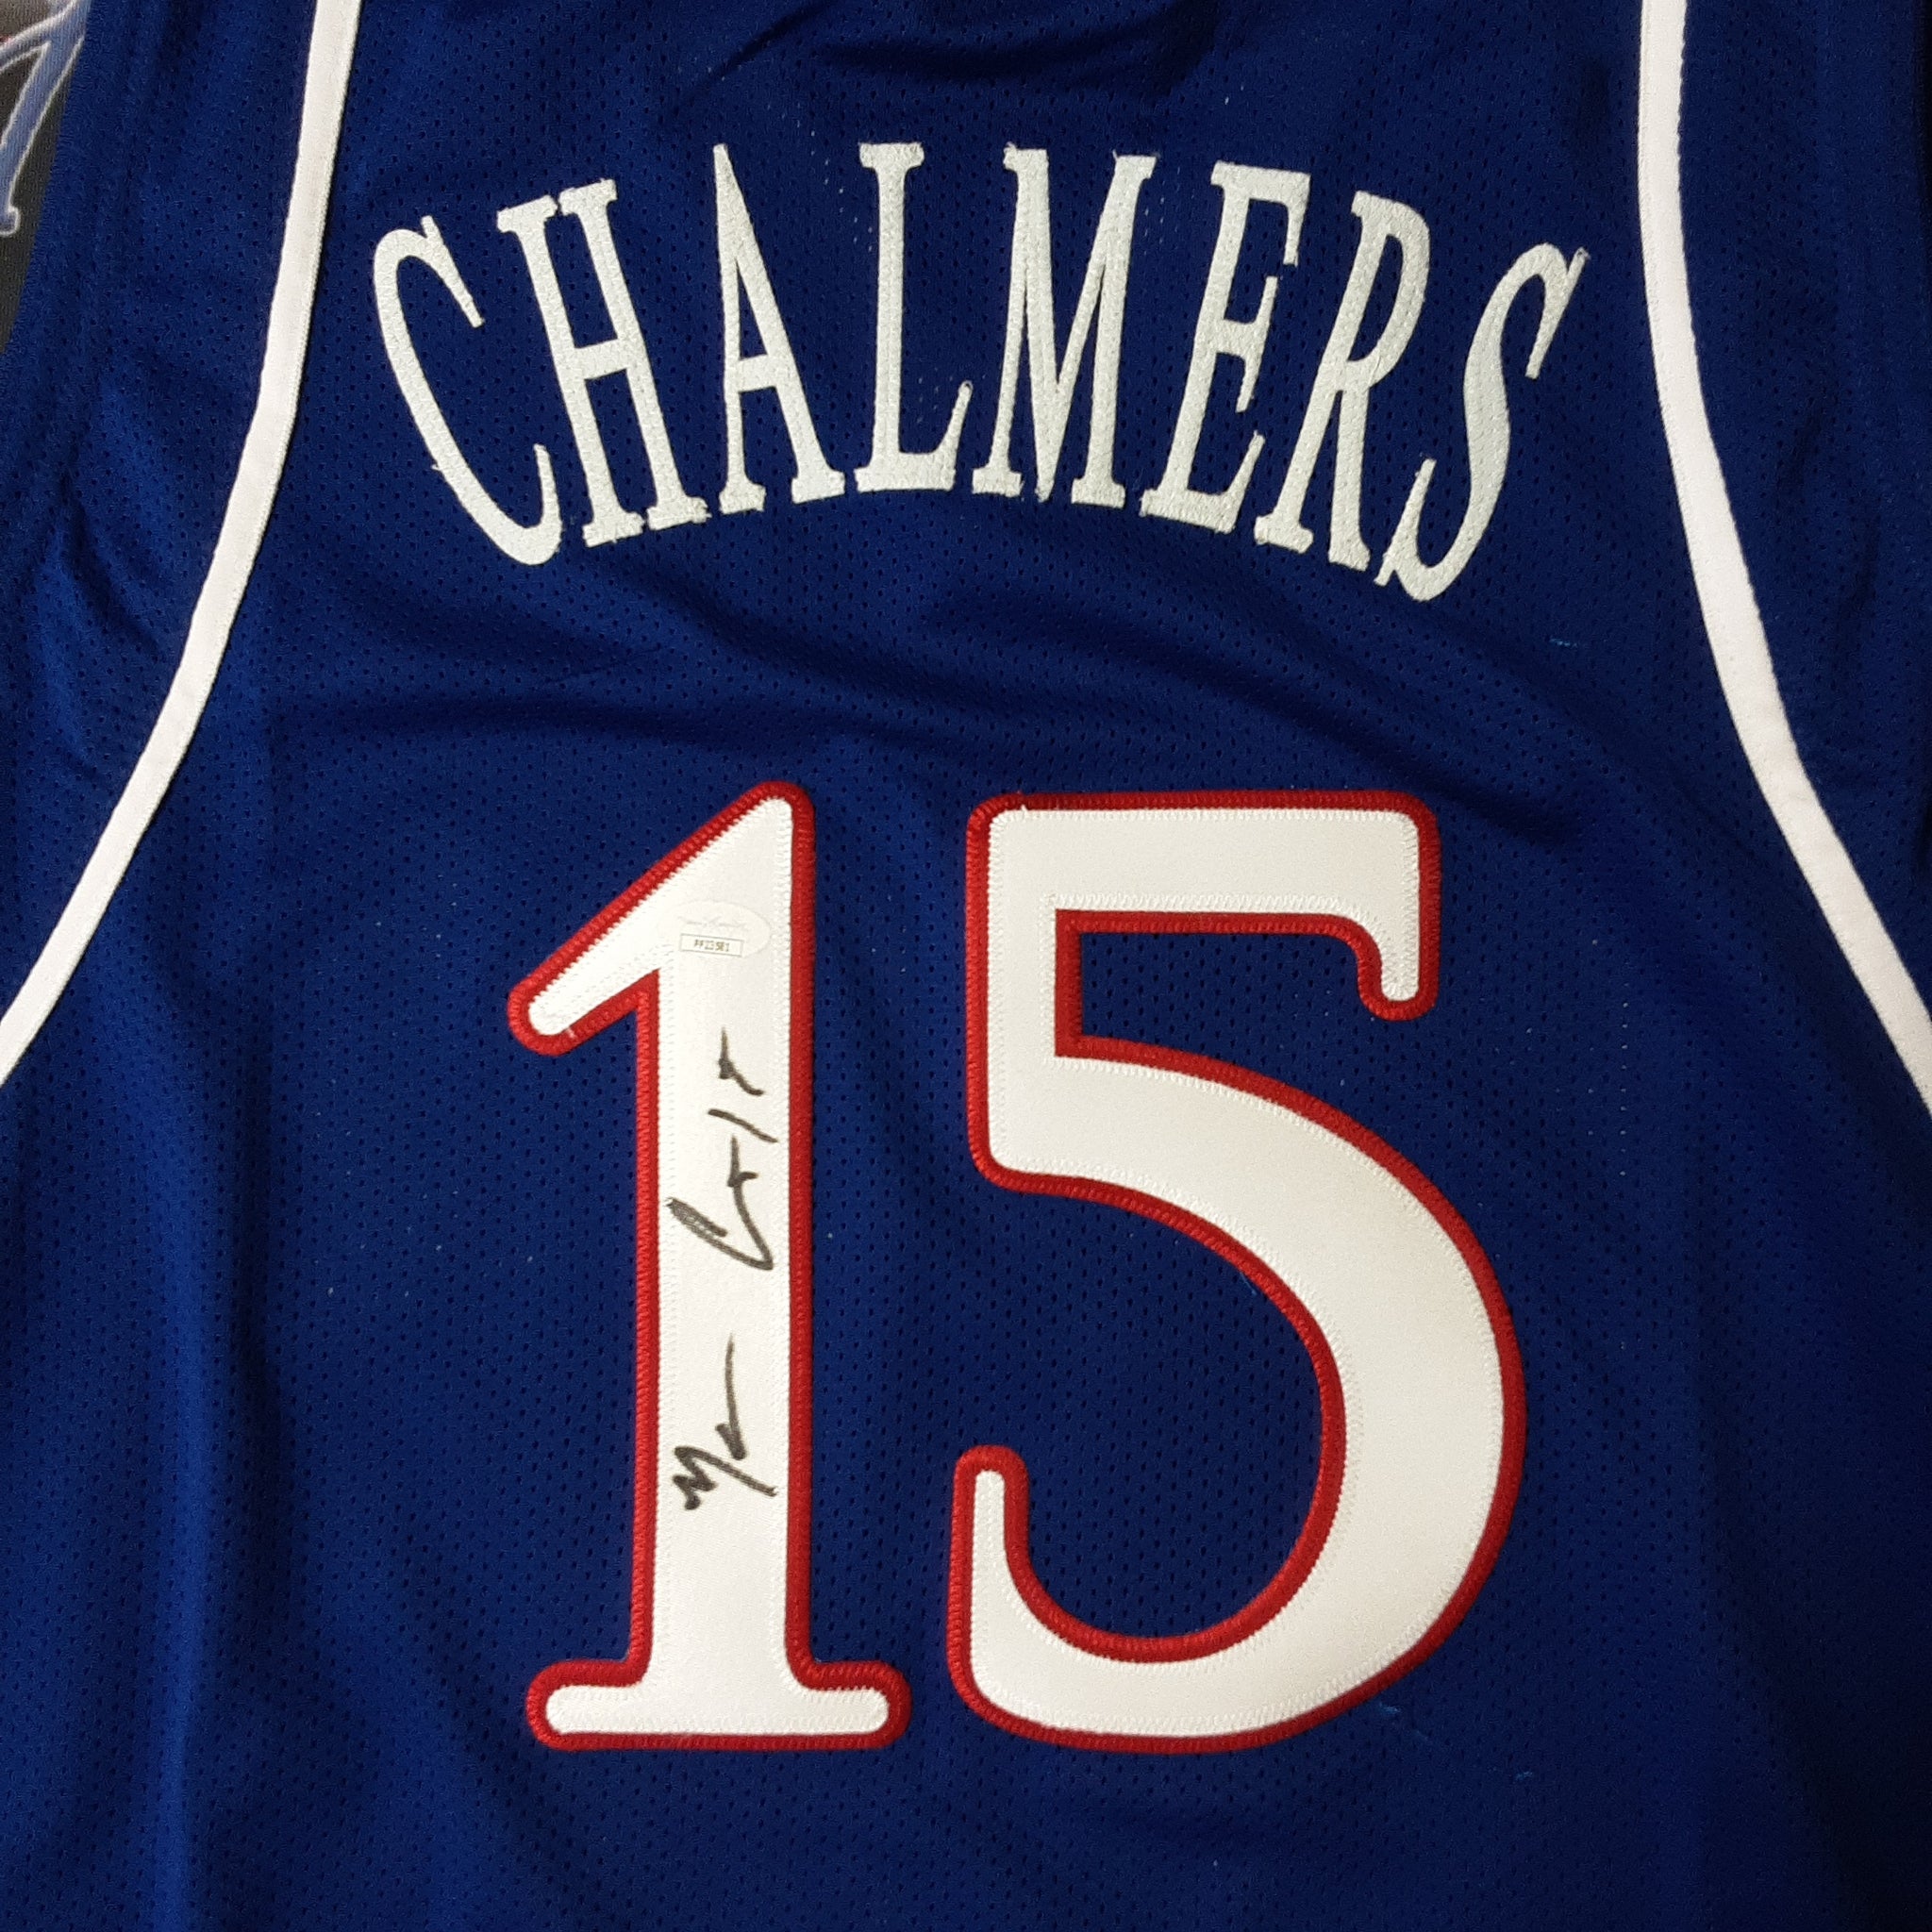 Mario Chalmers signed inscribed jersey autographed NCAA Kansas